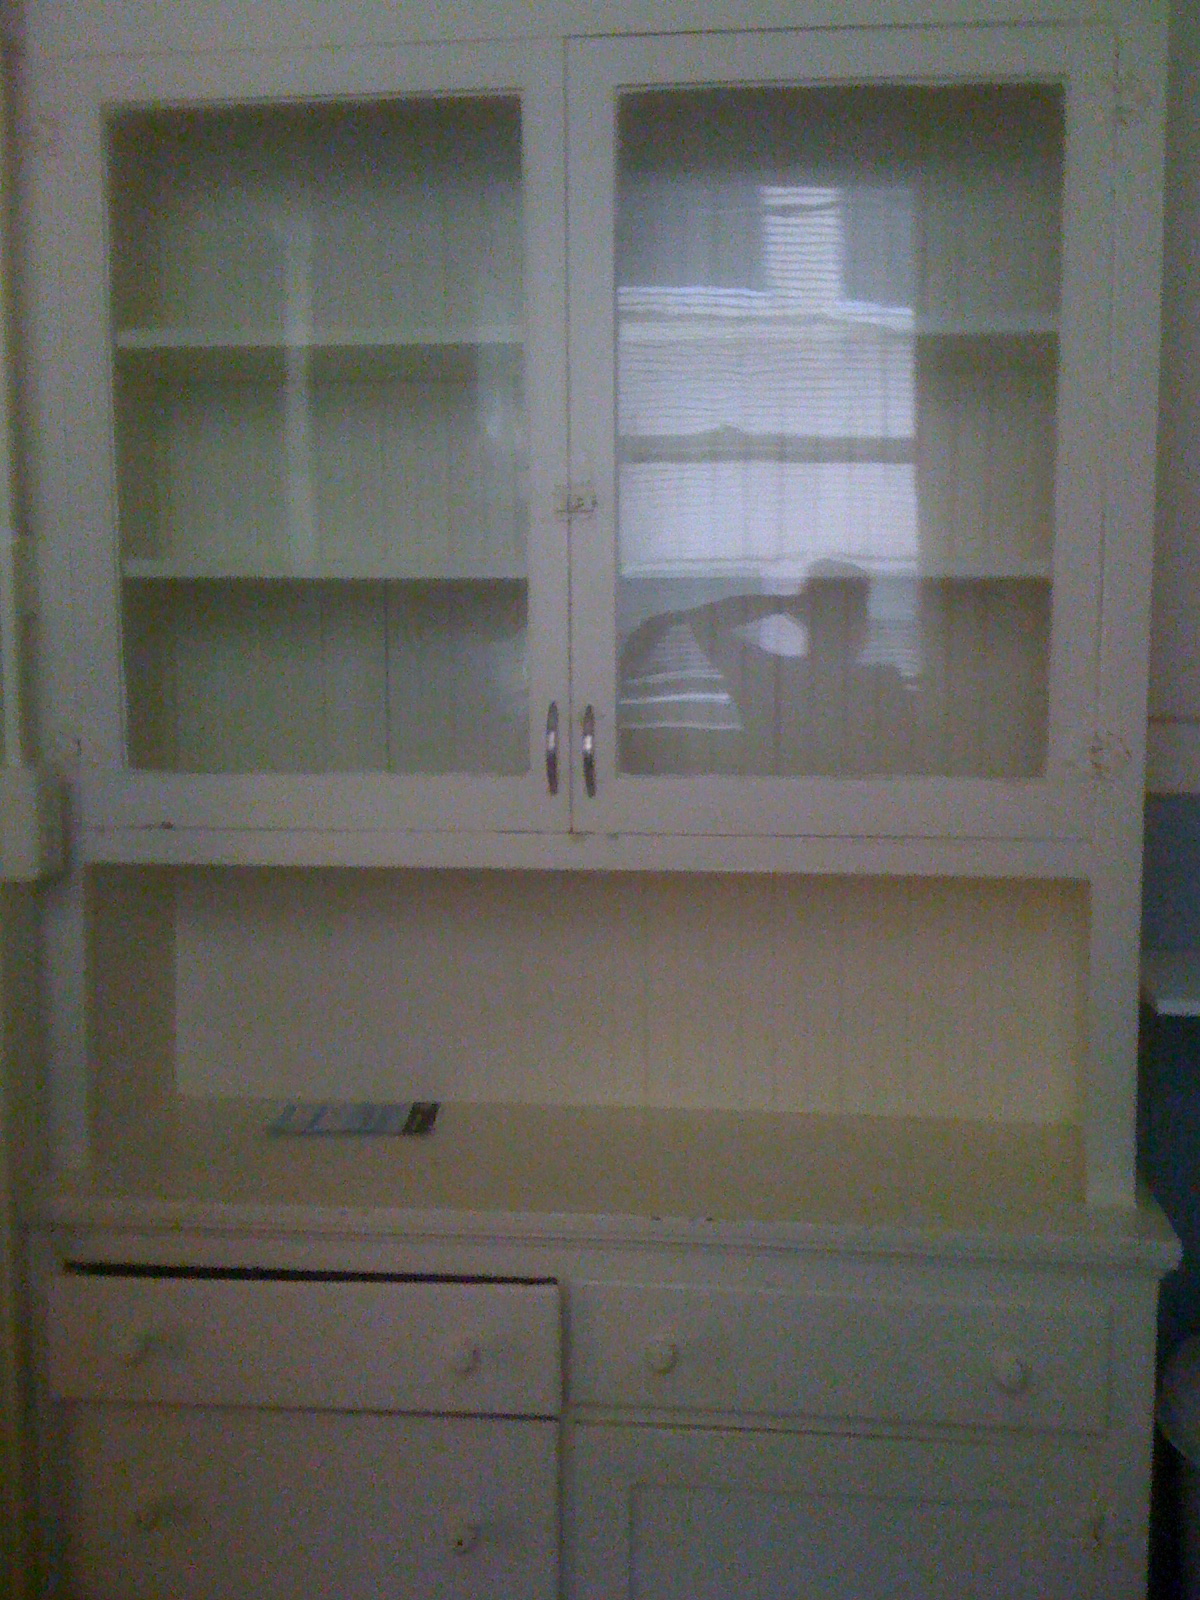 an empty white cabinet with glass doors and drawers